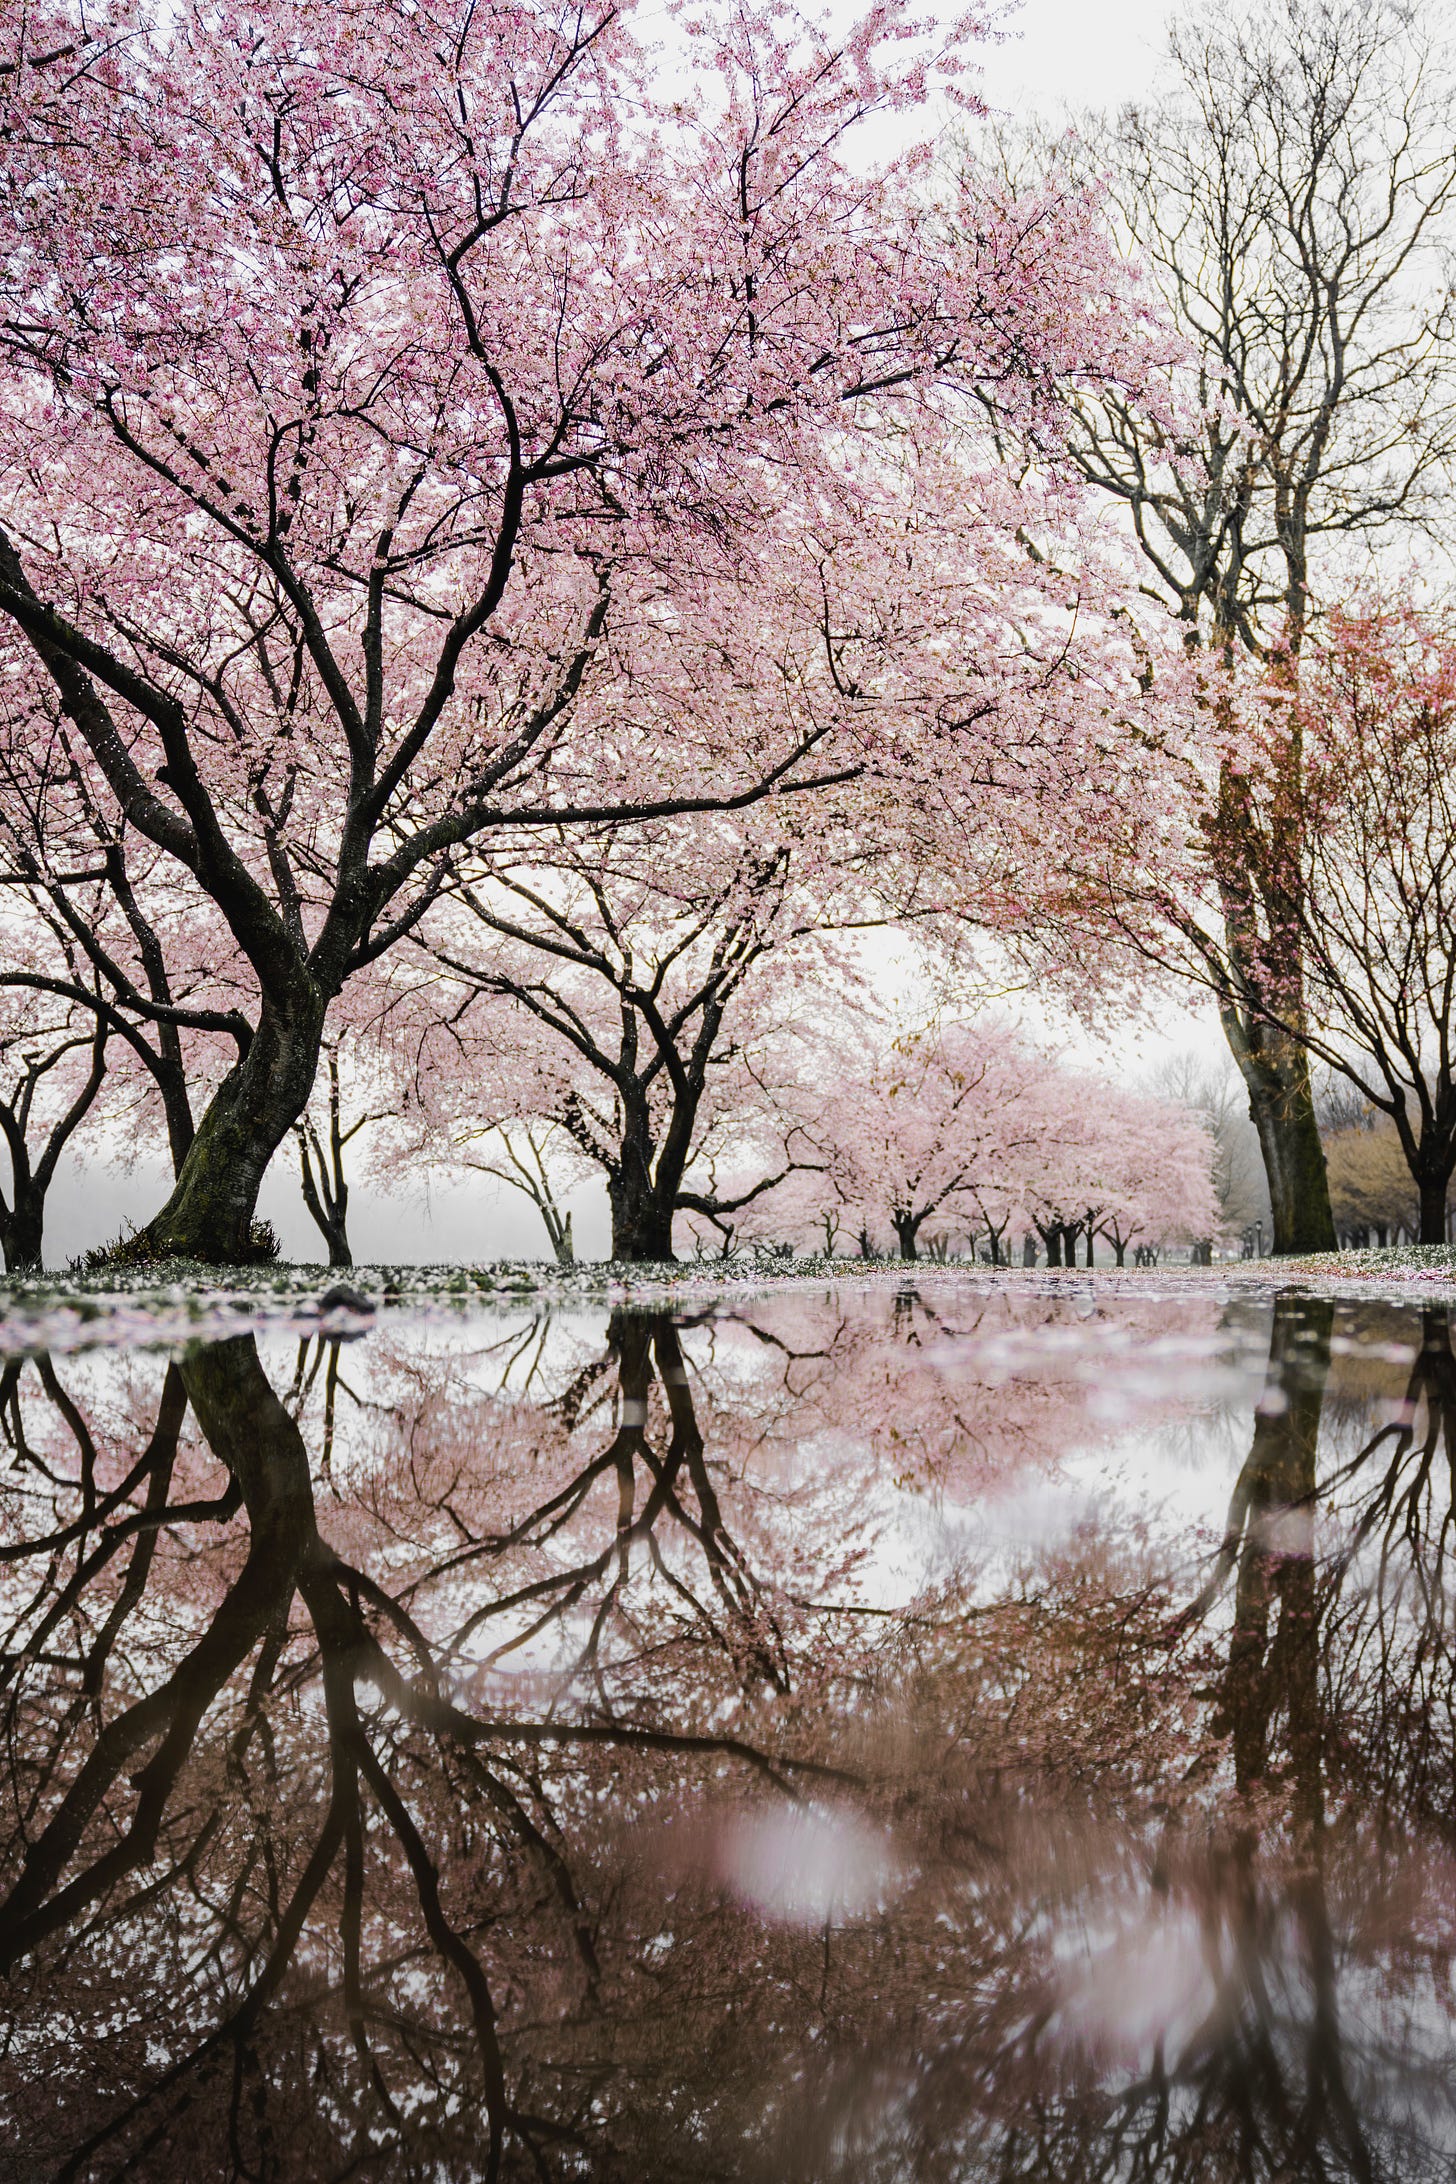 Cherry trees in blossom reflecting in a pond